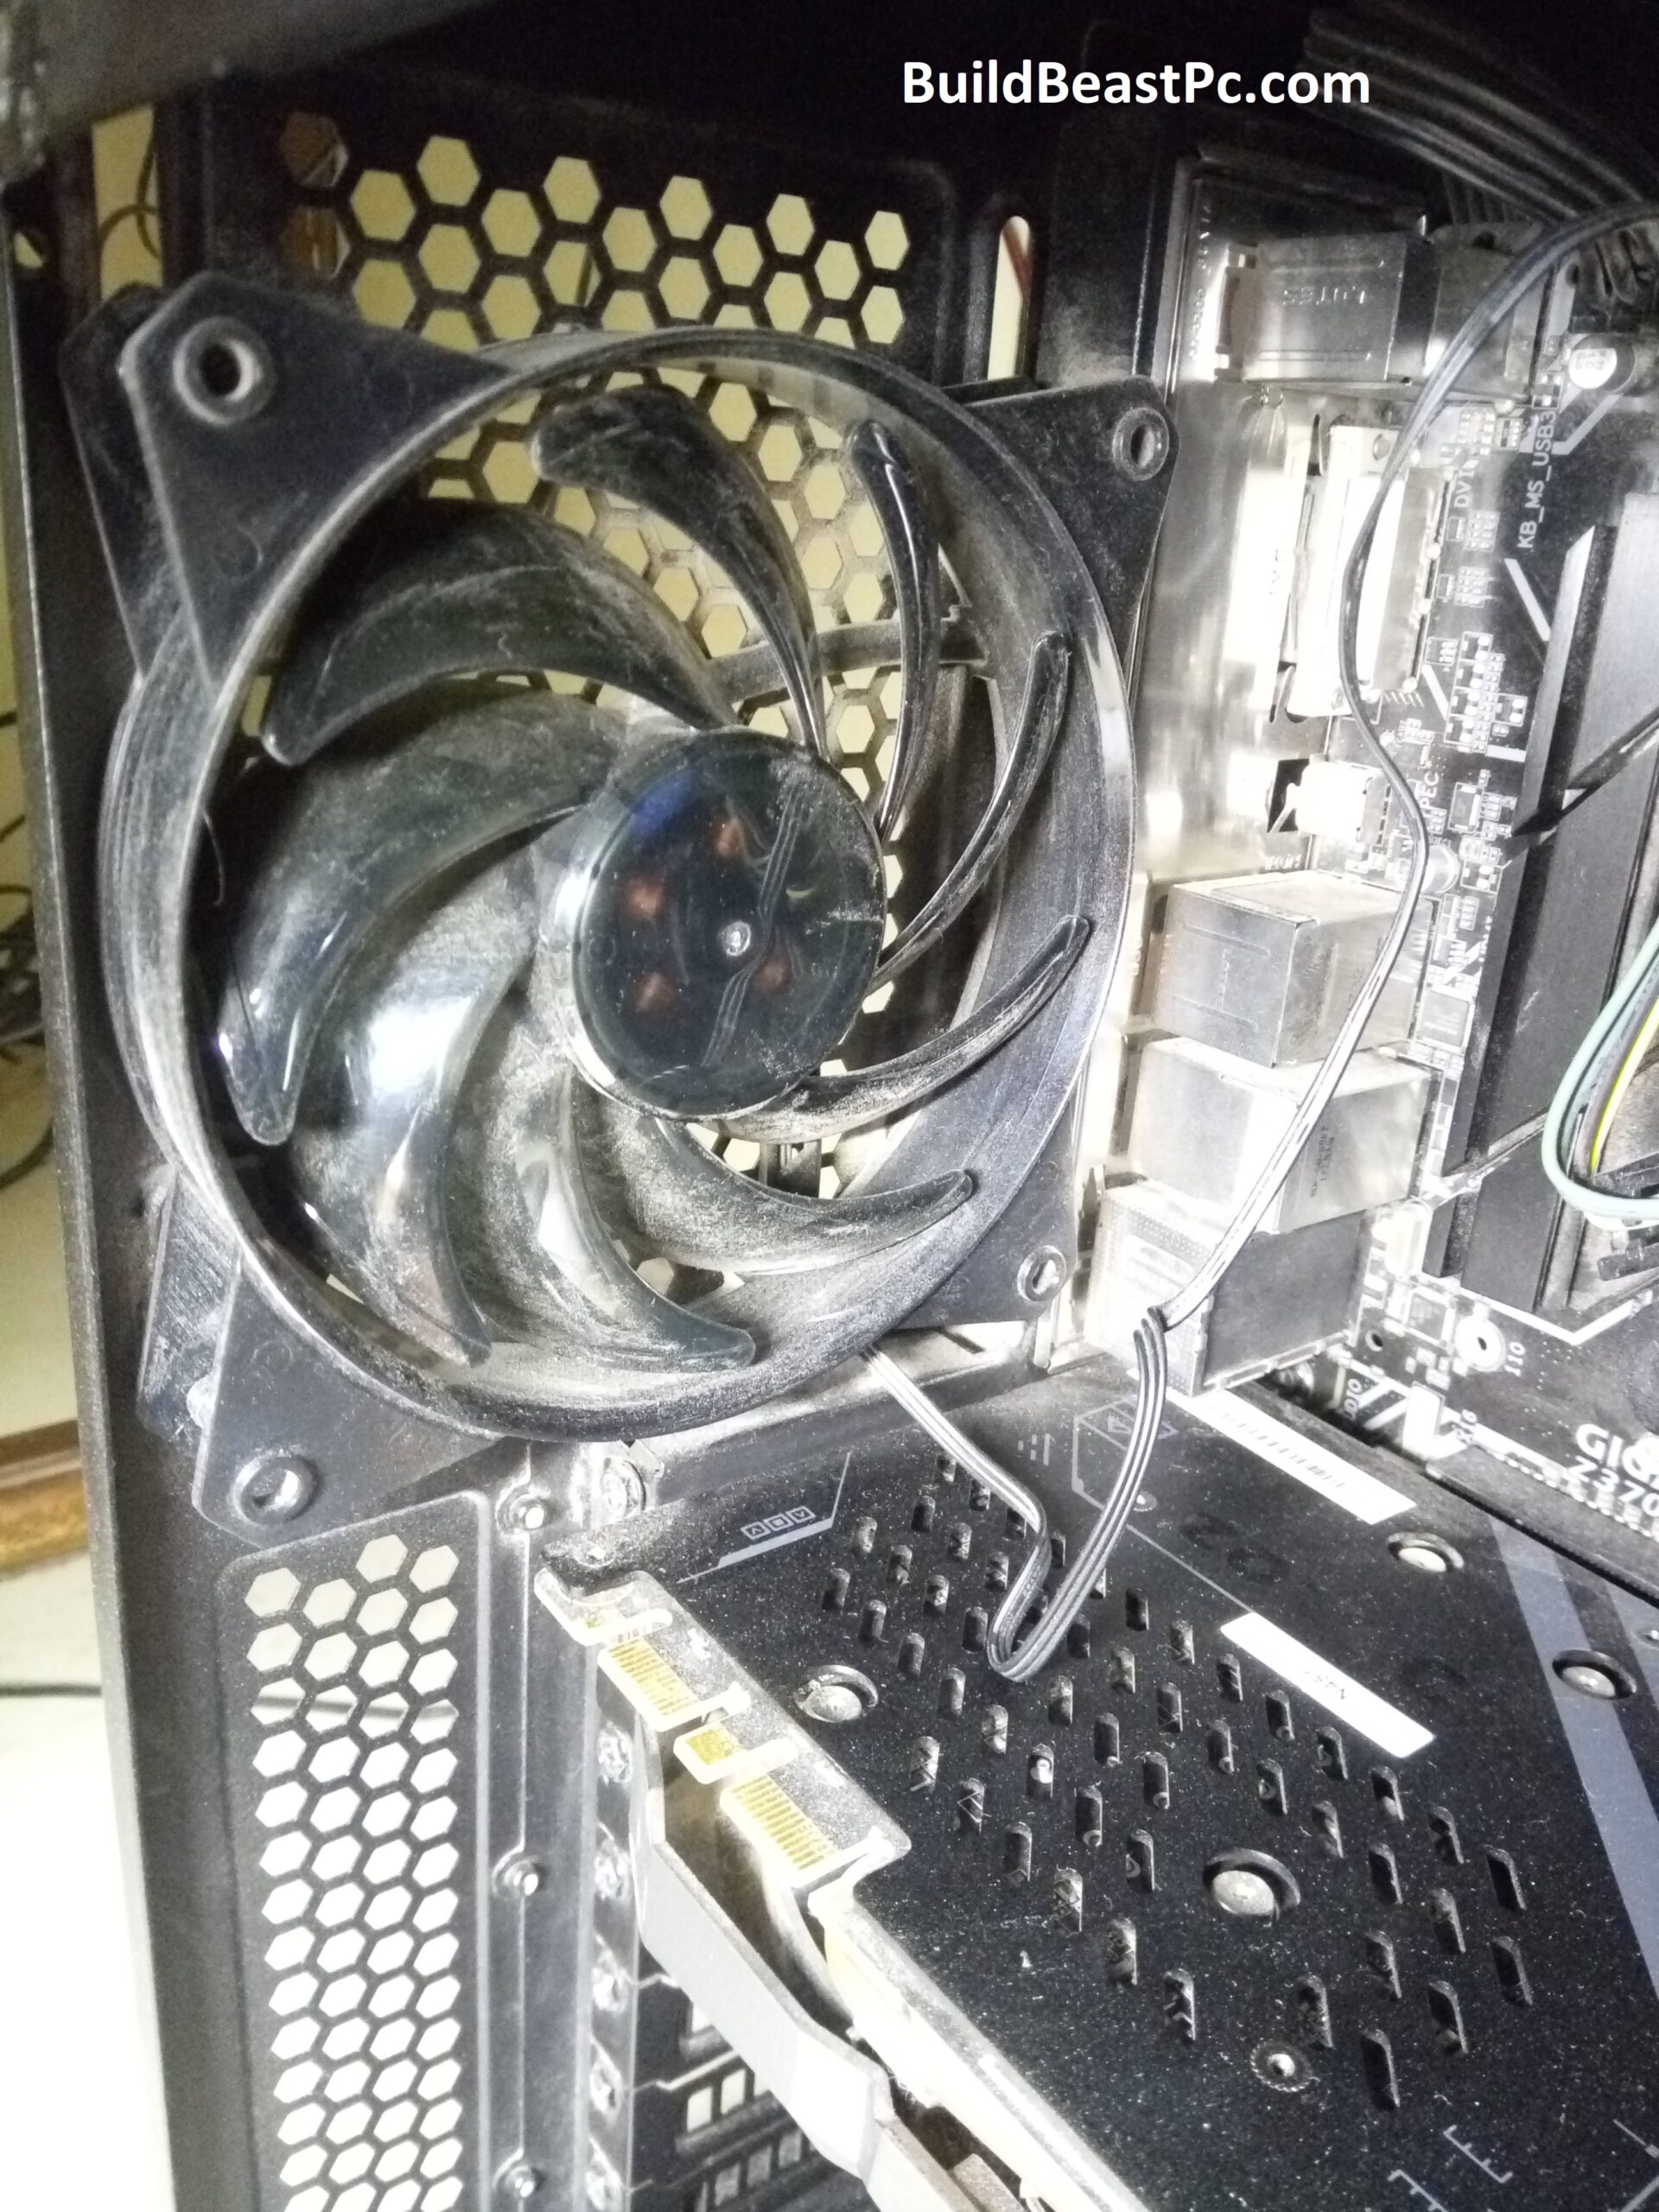 Installing Case Fans the Wrong Way Around